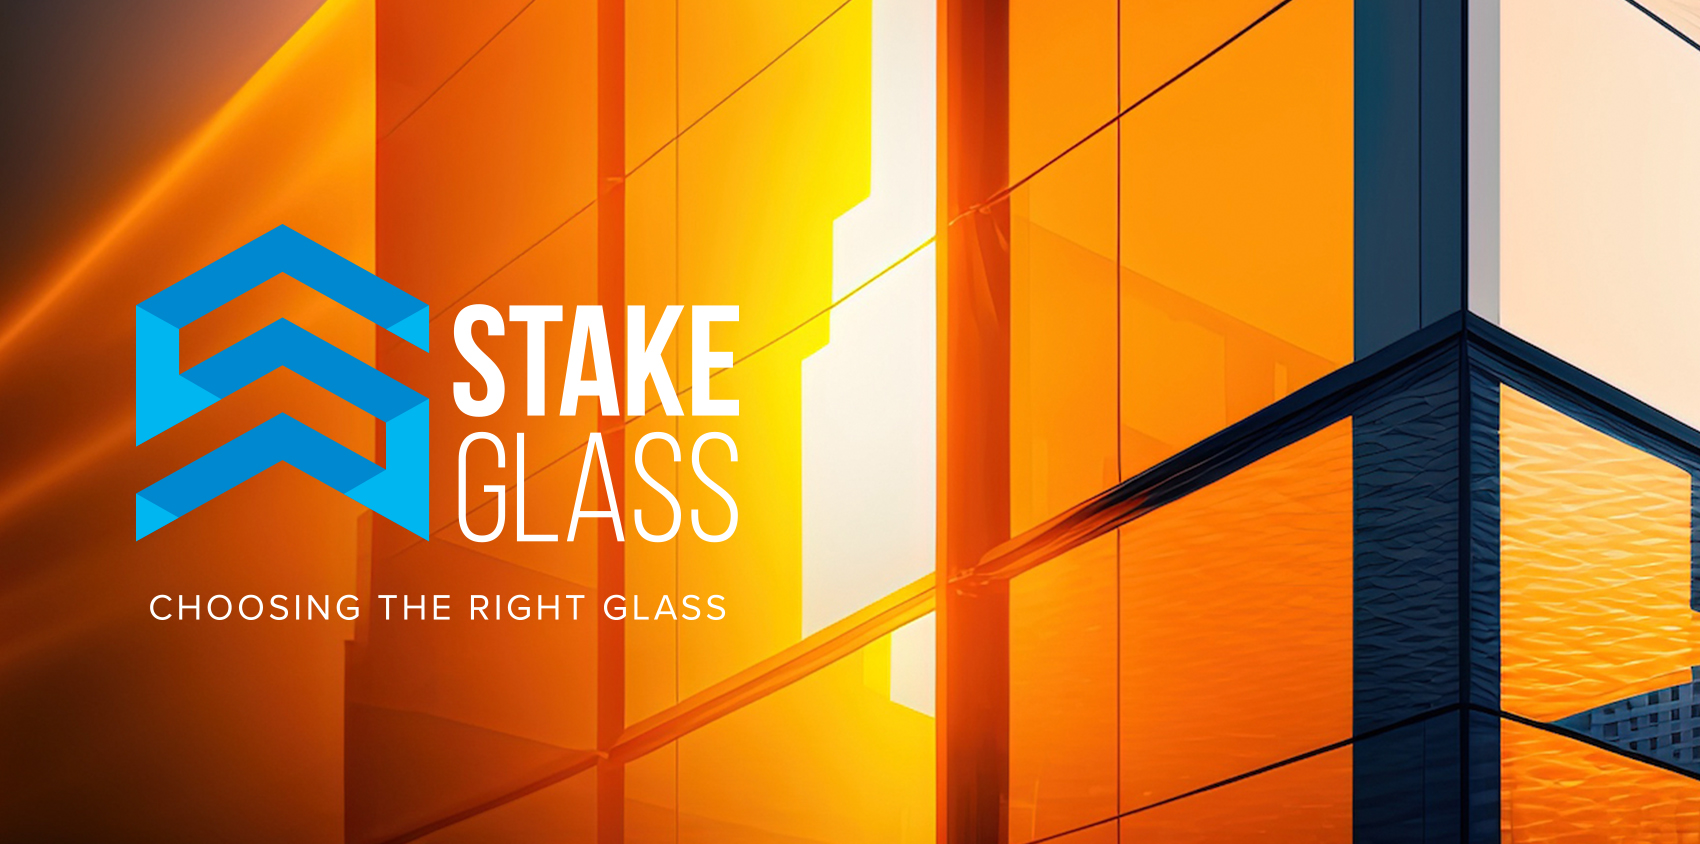 stake glass case study banner